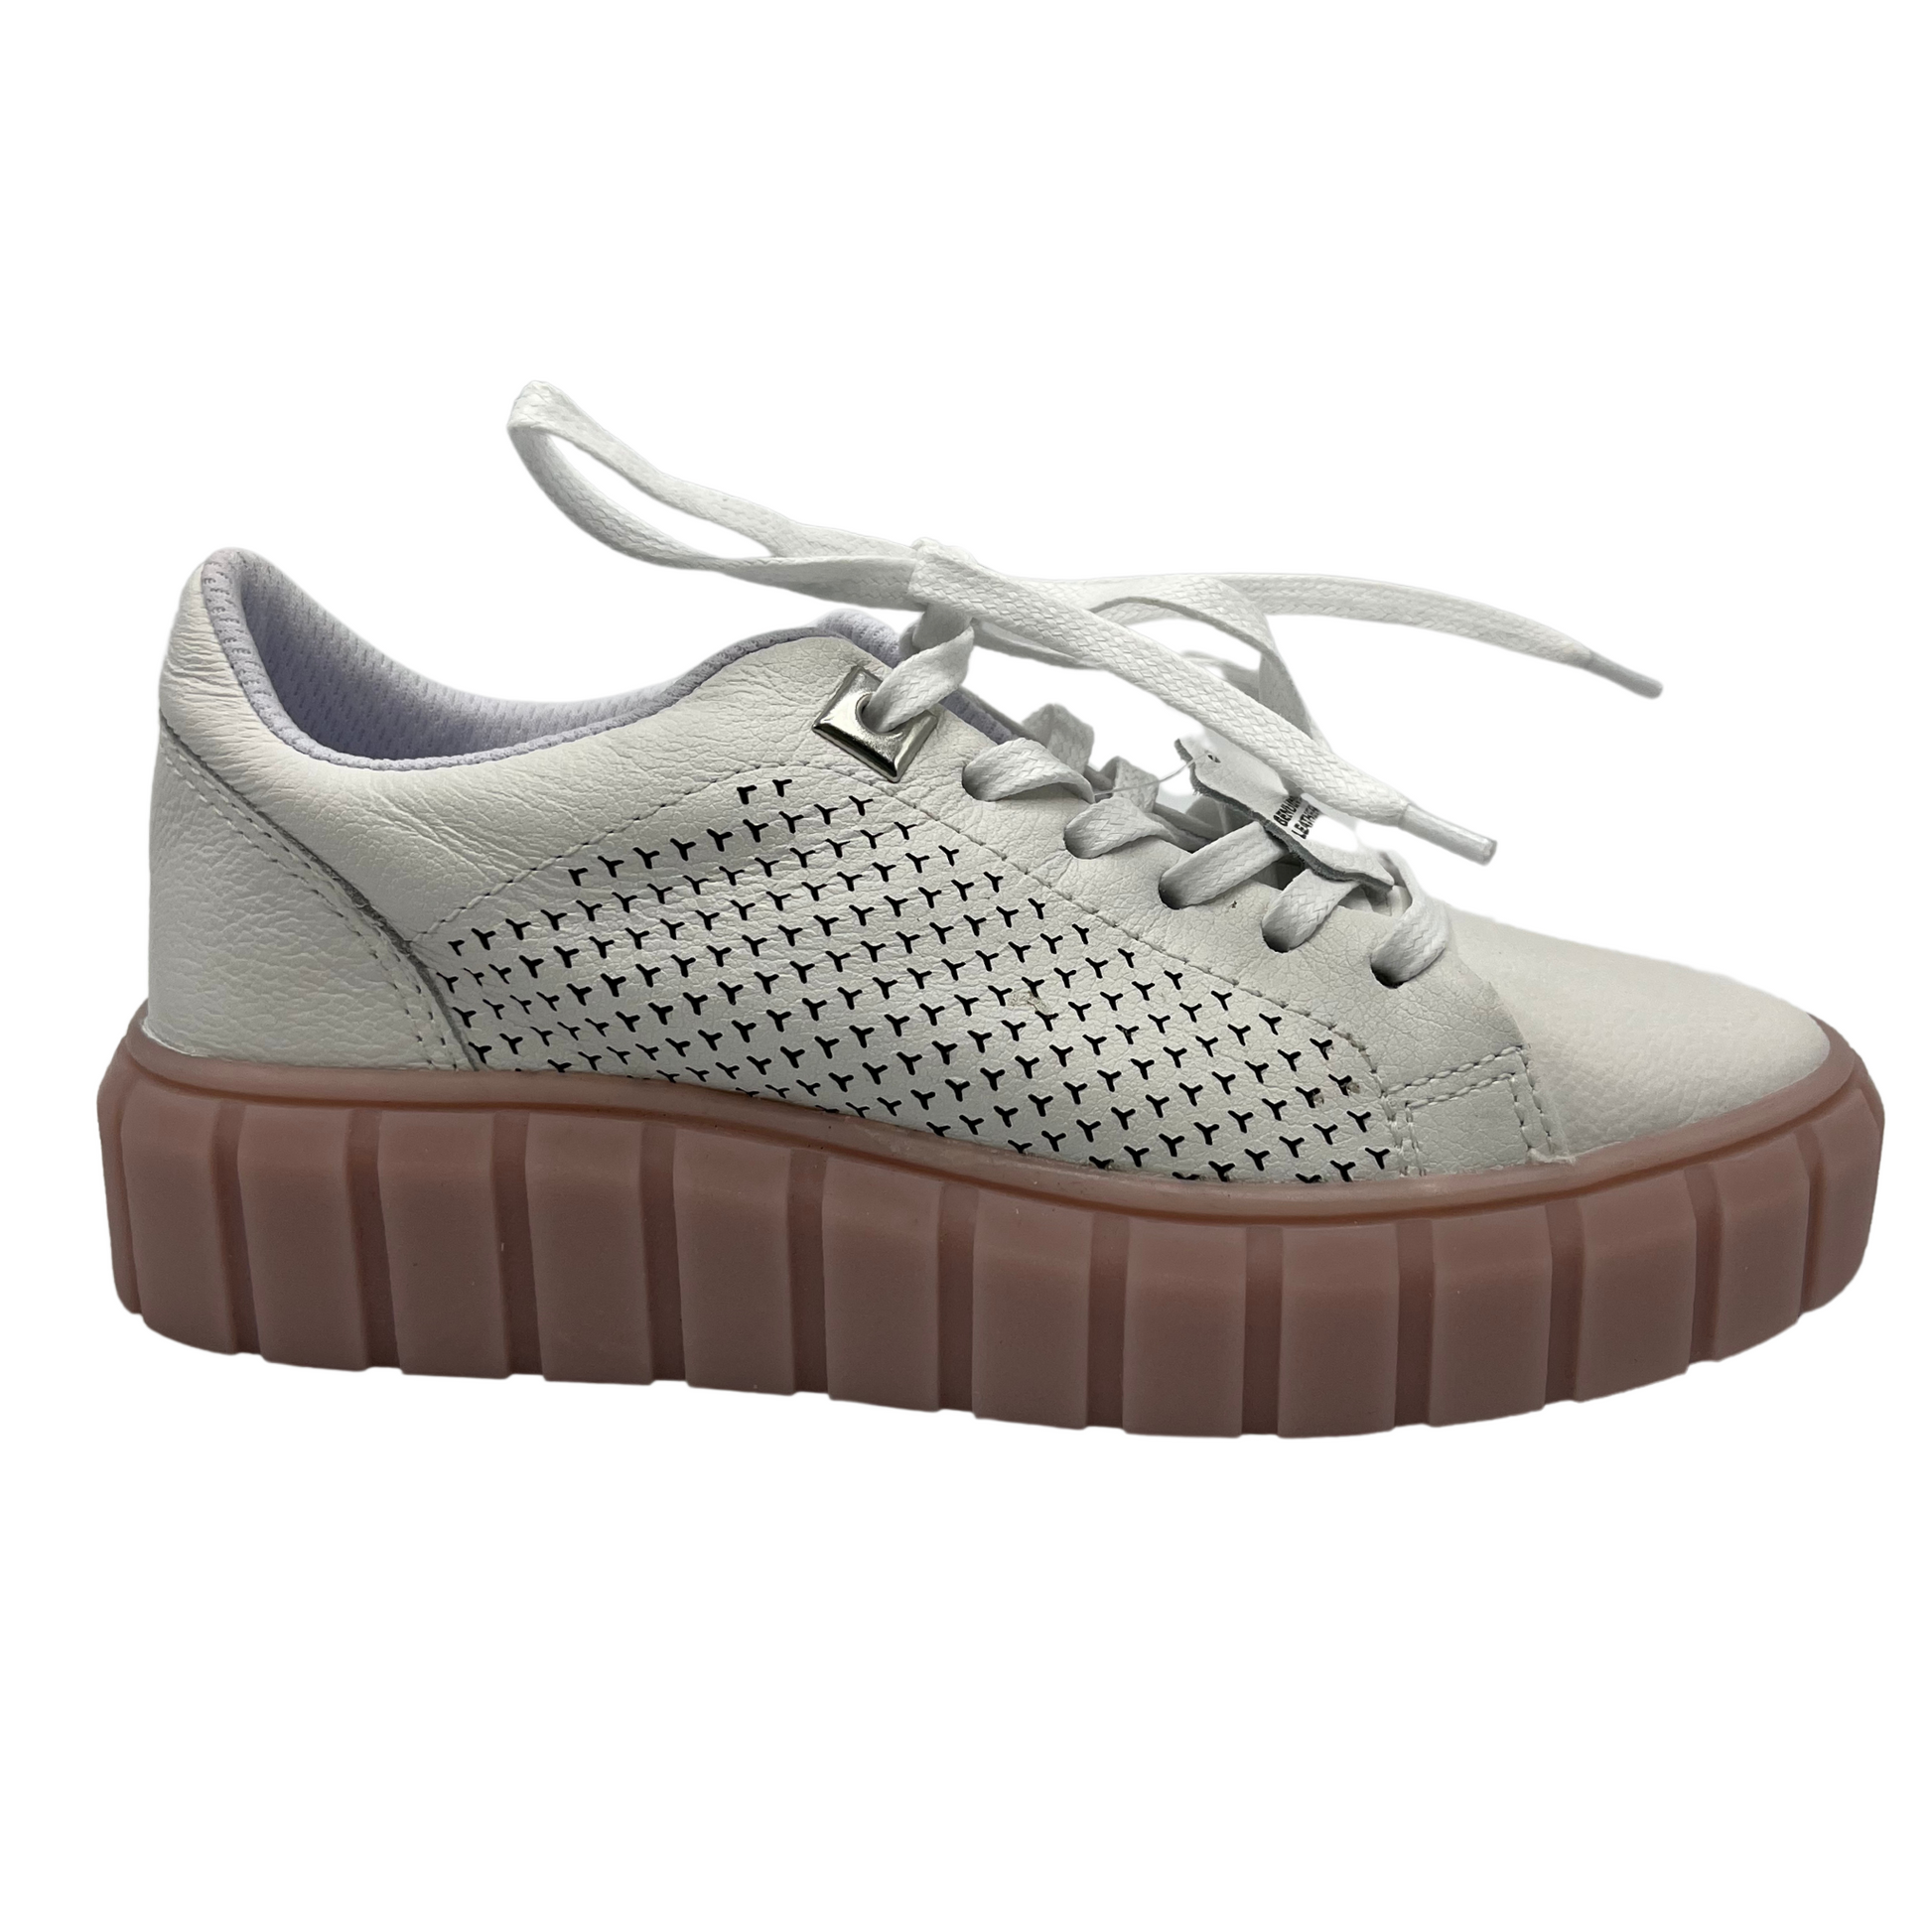 Right facing view of white leather sneakers with rose coloured platform rubber outsole. White laces and perforated leather details on the sides.